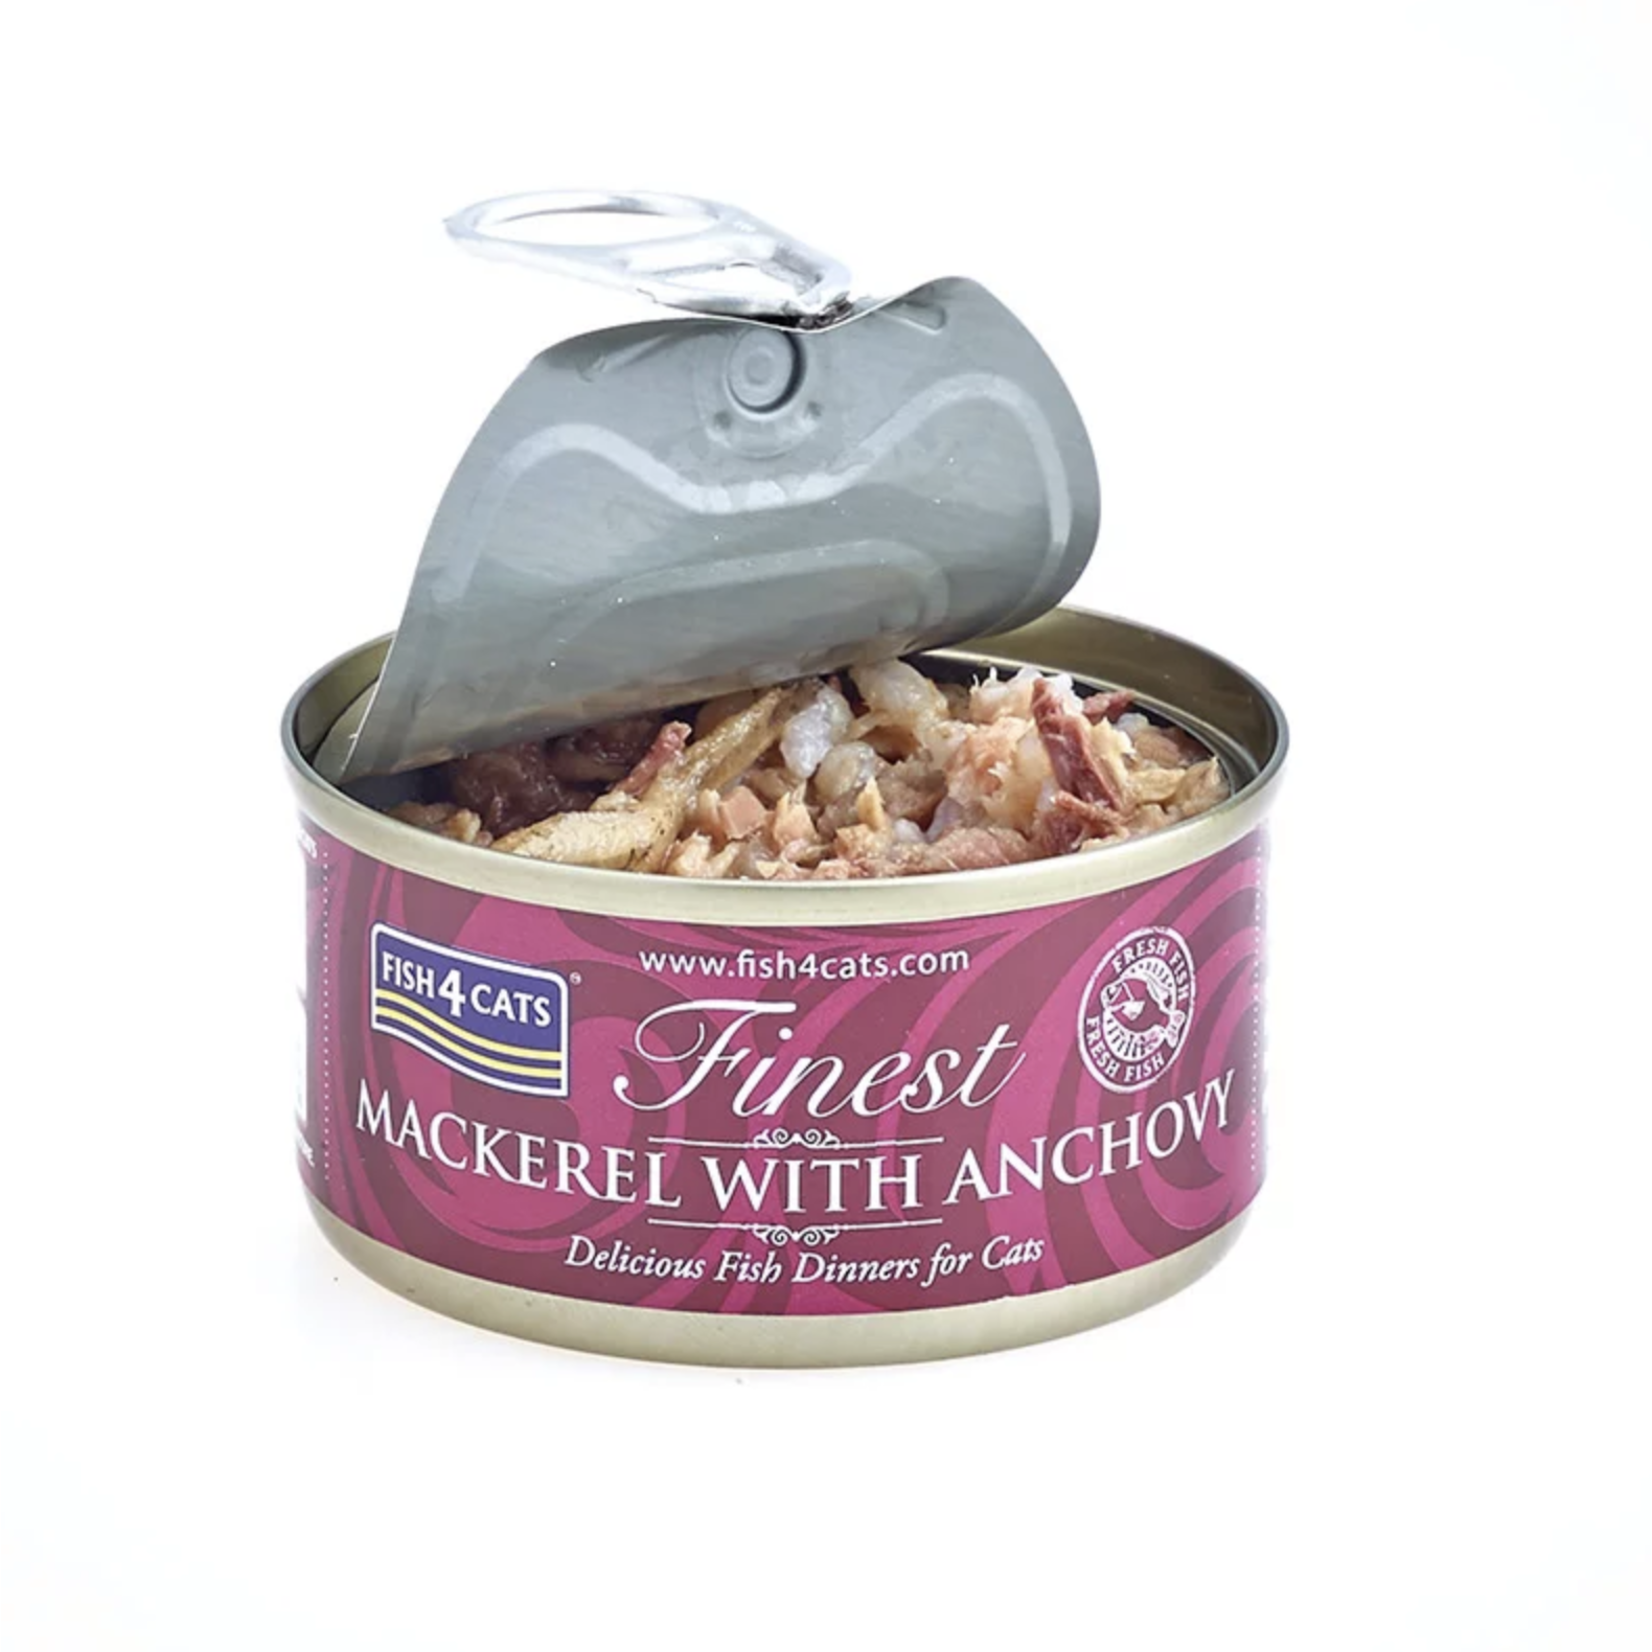 Fish4Cats Finest Mackerel with Anchovy Wet Cat Food, 70g can